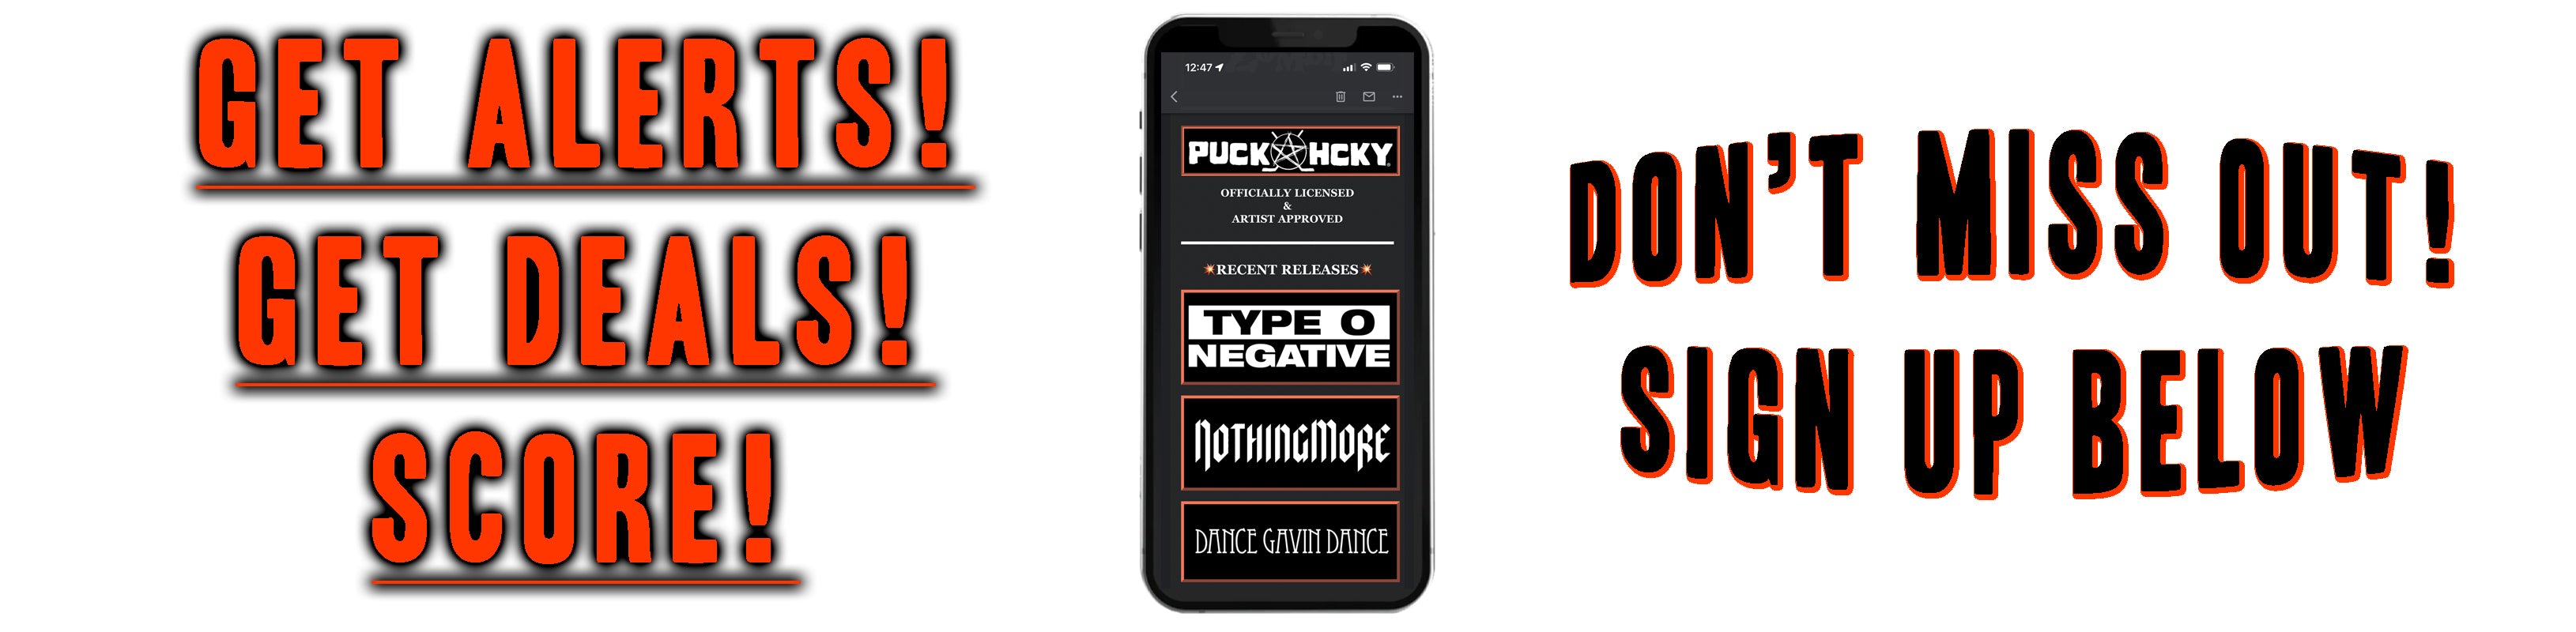 Puck Hcky x Metallica launch their hockey jersey collection – Knotfest